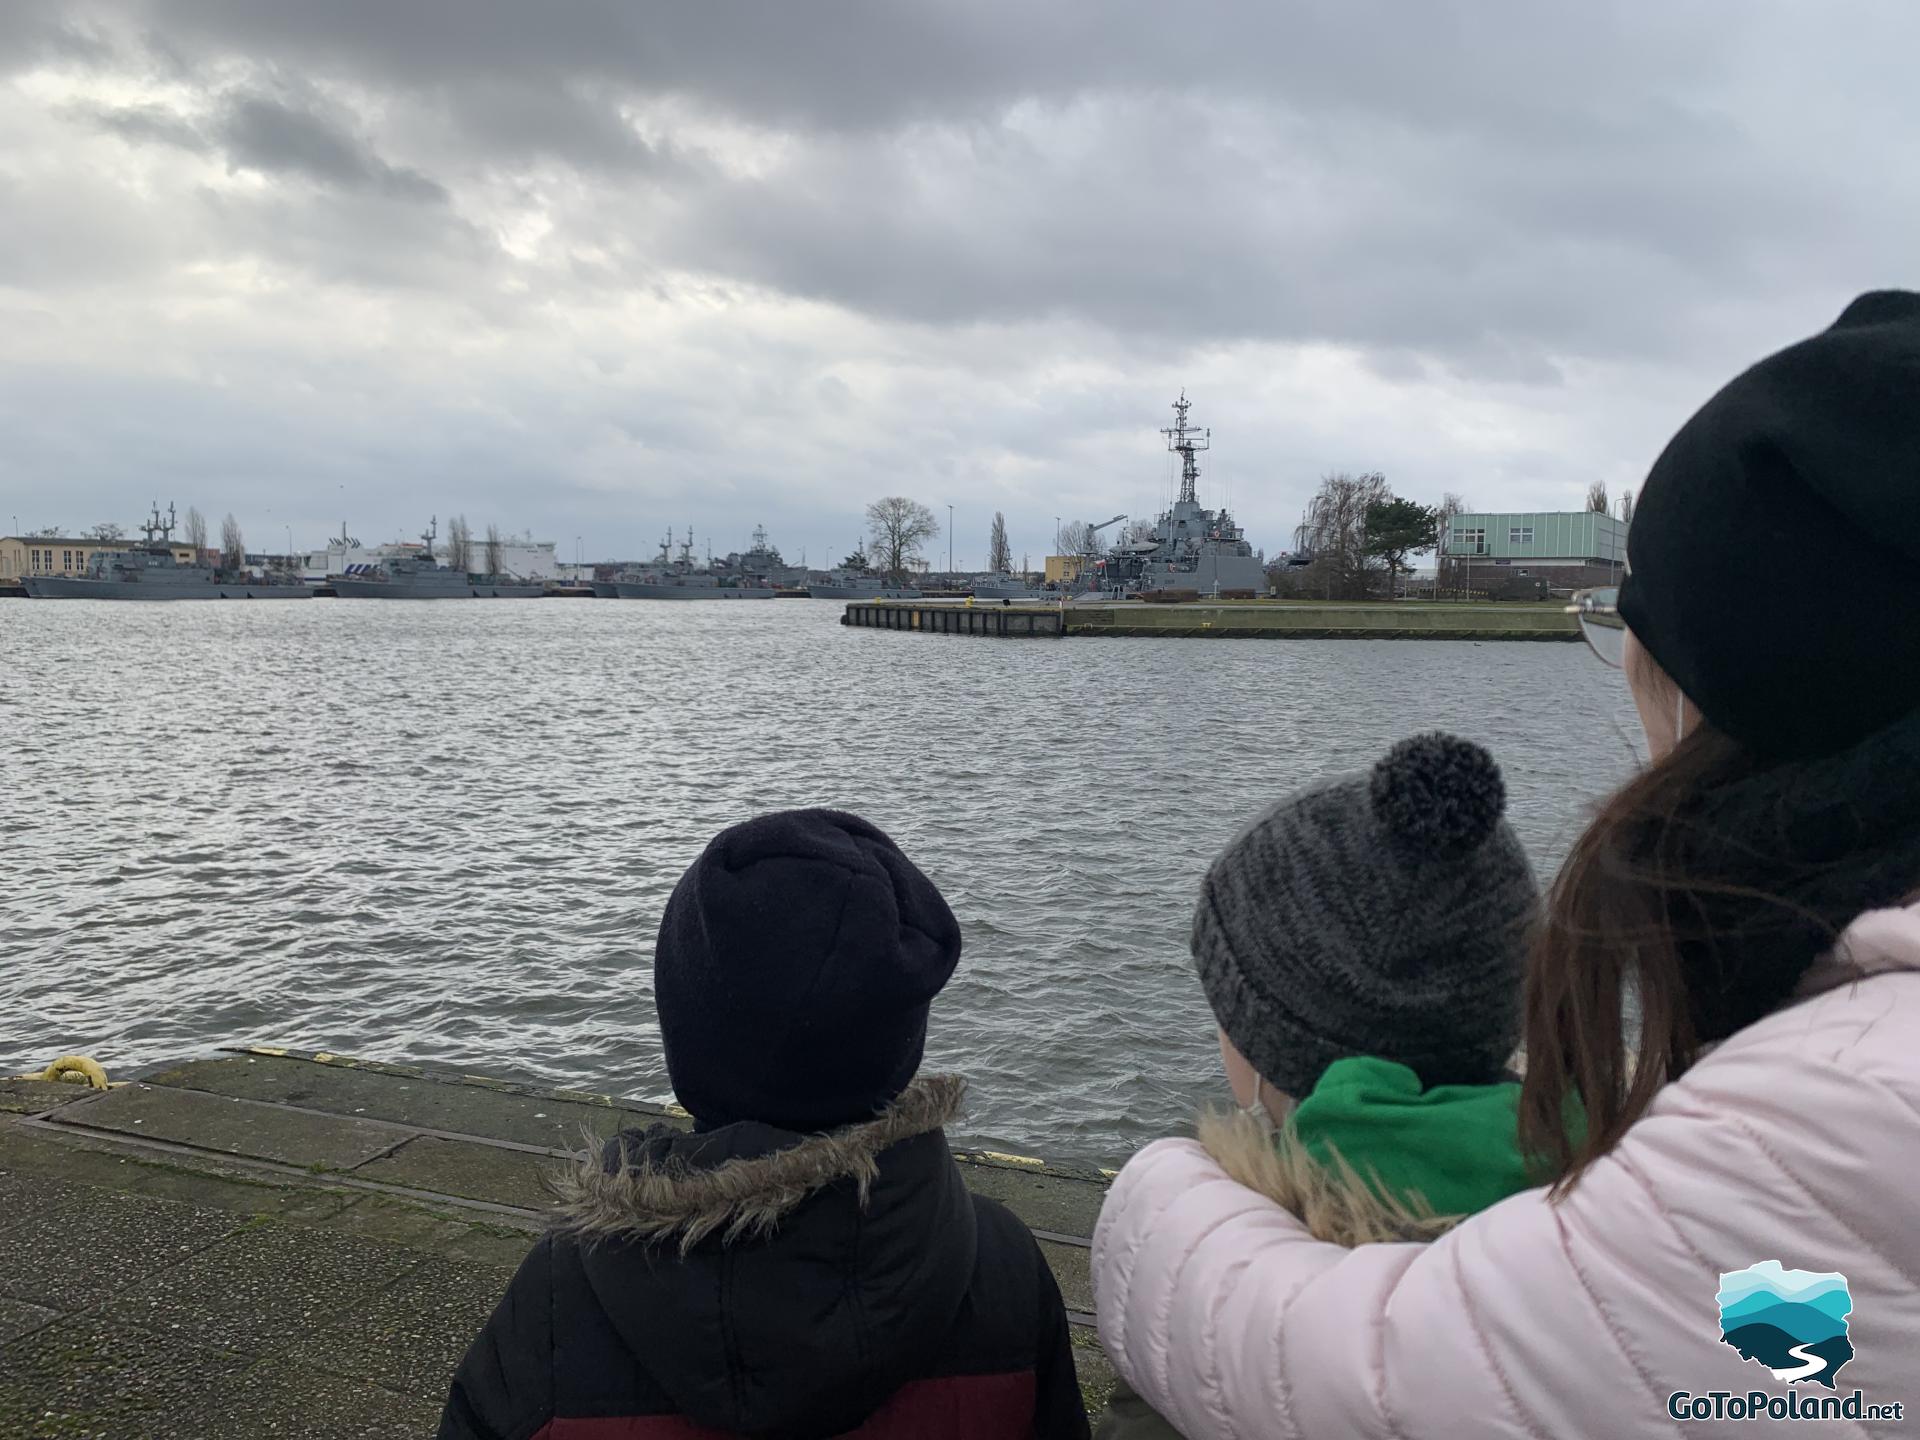 a woman and two boys are are watching the other bank of the river and navy ships